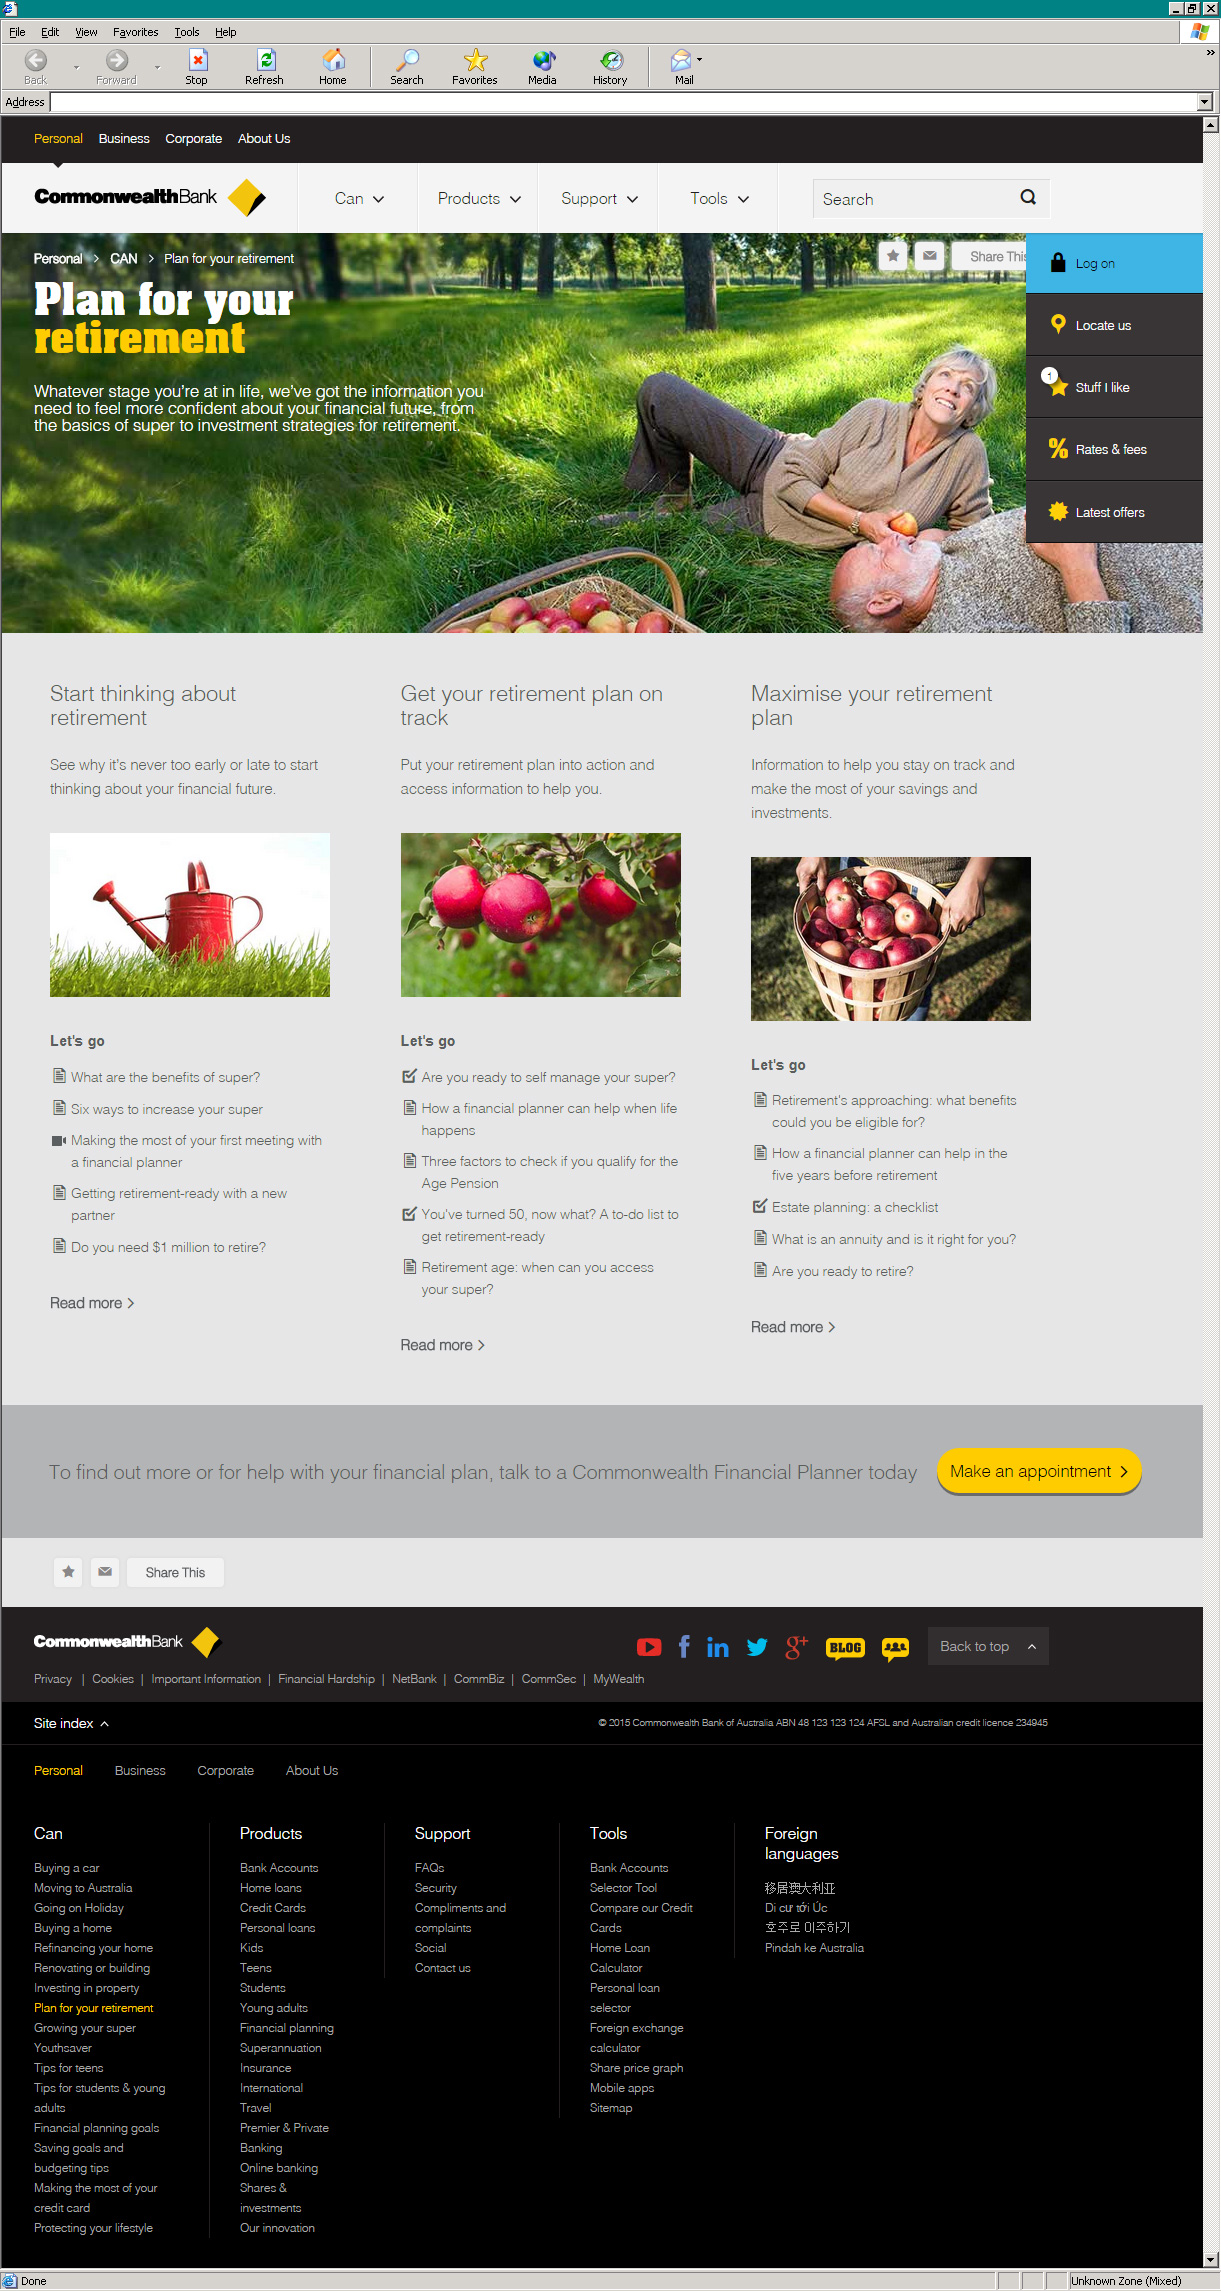 Commonwealth Bank's retirees webpages